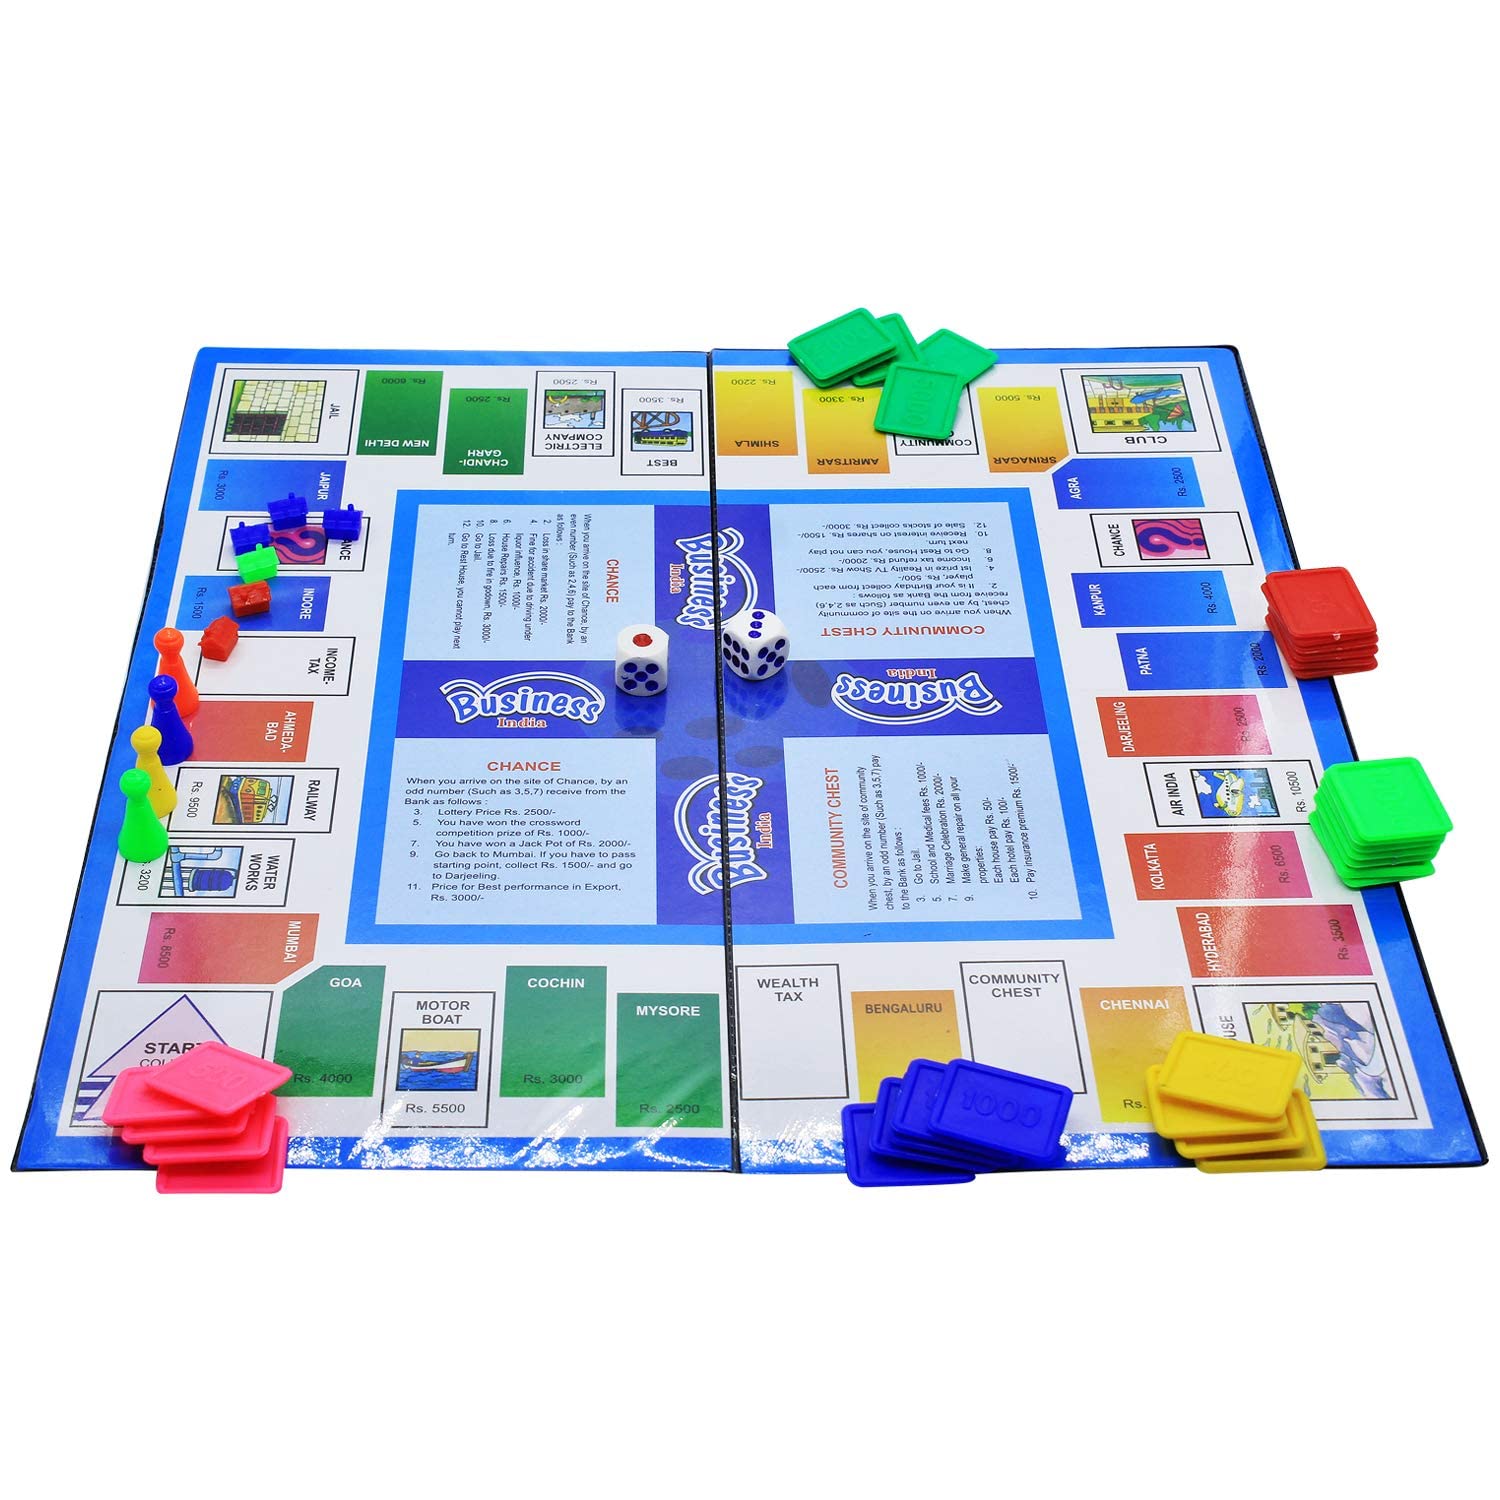 Ekta Business India Game For Kids And Family 2-6 Players - Multicolor